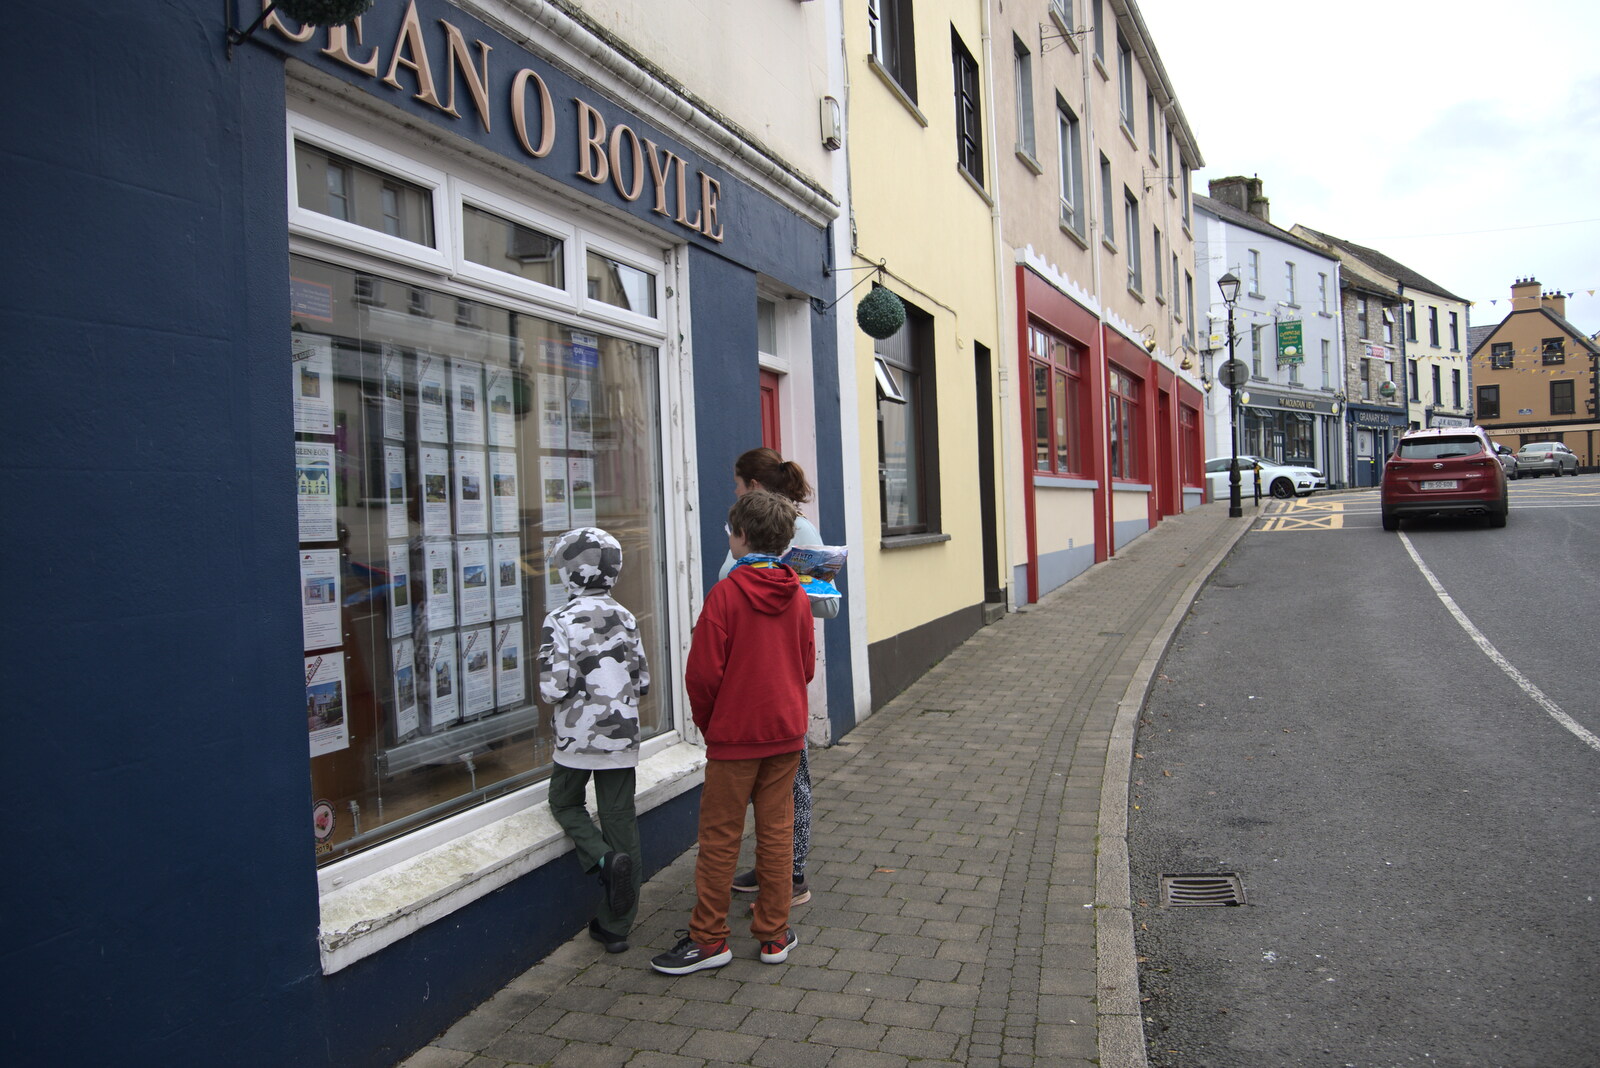 Isobel and the boys look at house prices from Manorhamilton and the Street Art of Dún Laoghaire, Ireland - 15th August 2021